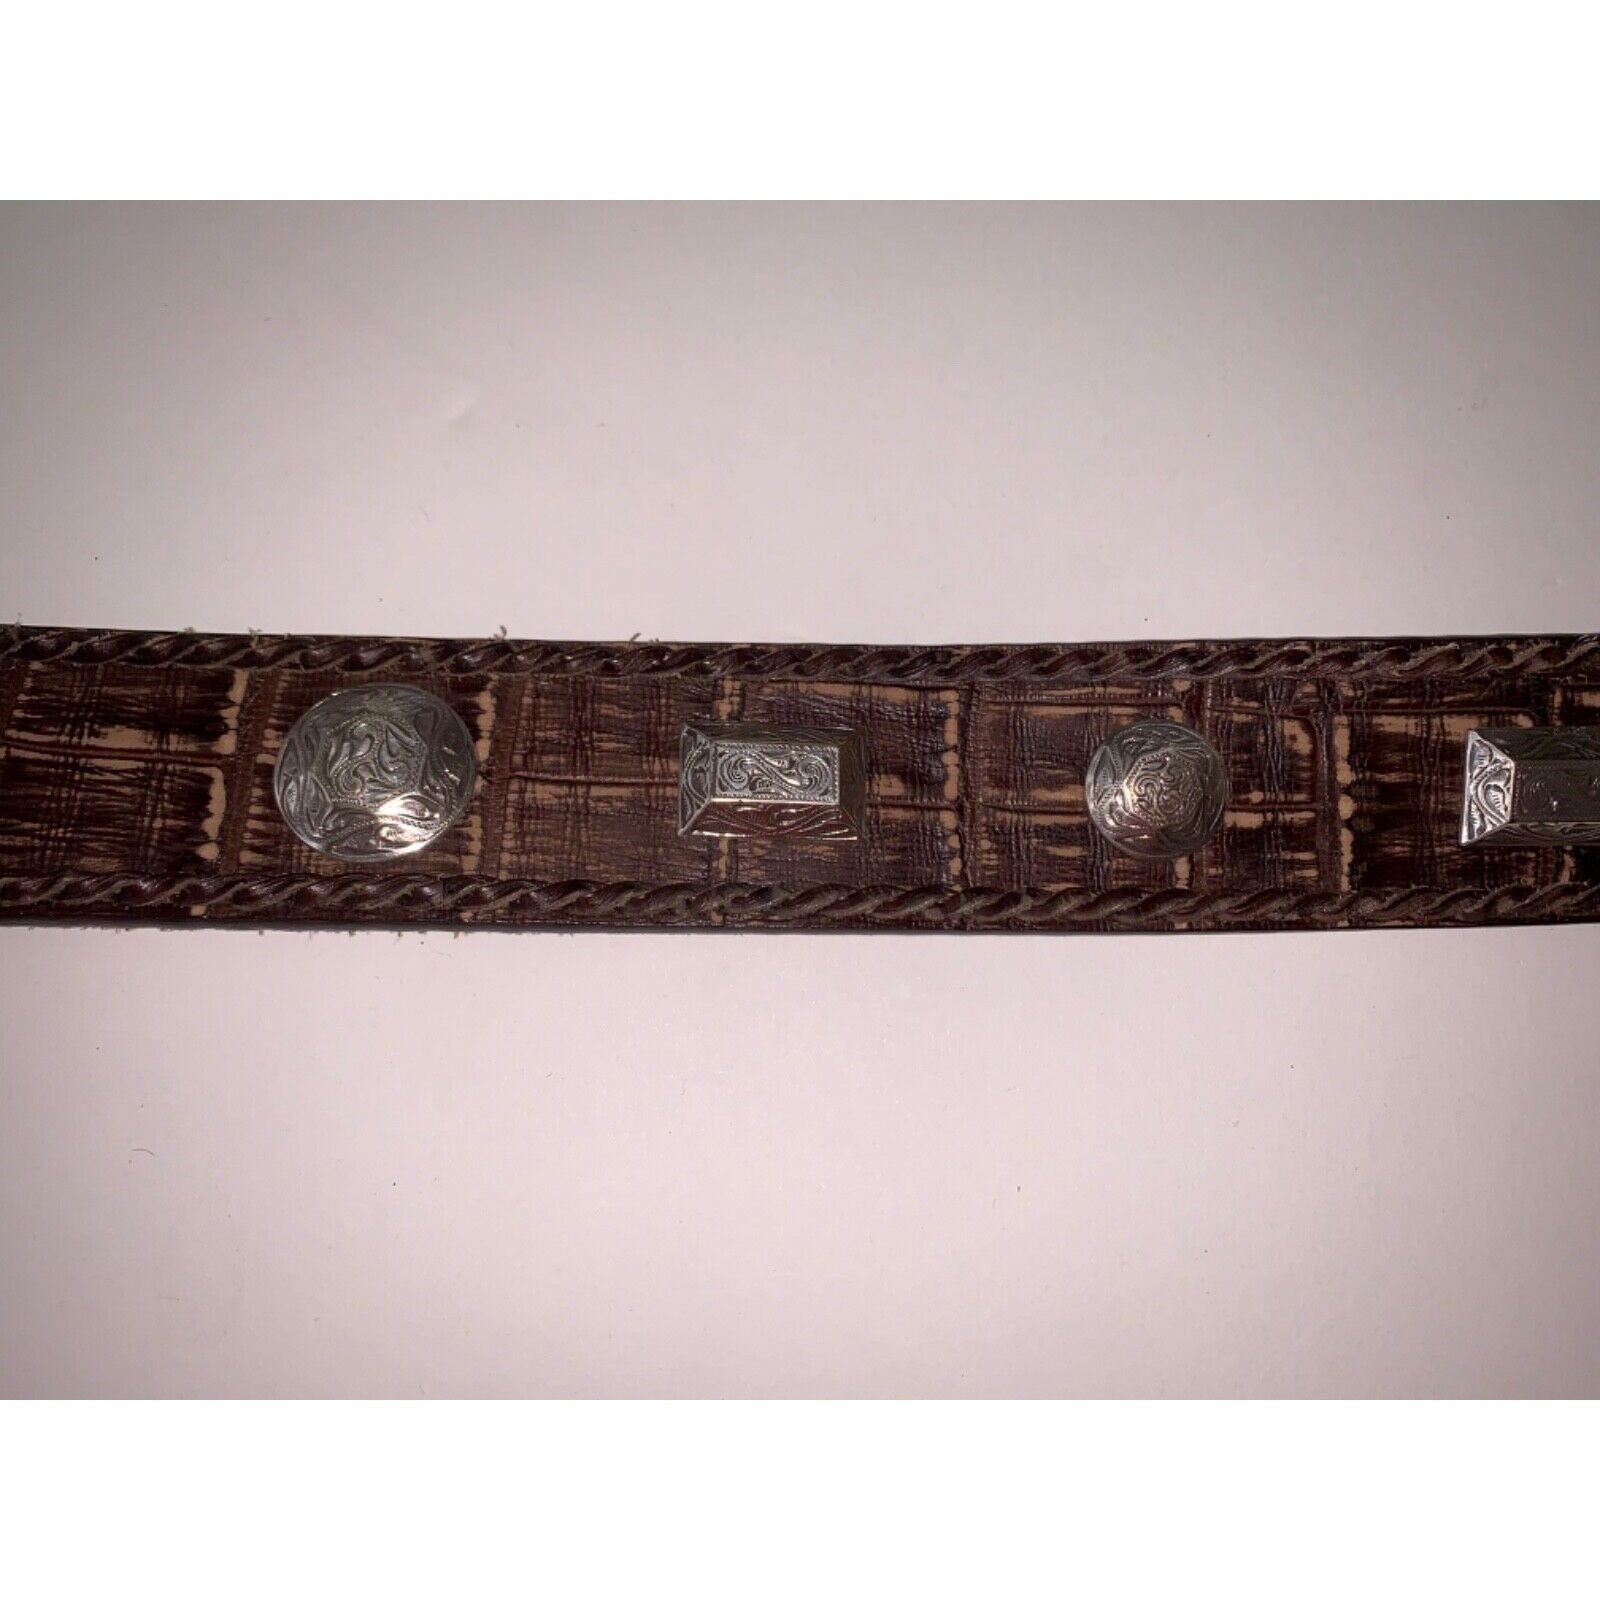 BRIGHTON 32 silver buckle wide leather belt brown medallions asiago concho